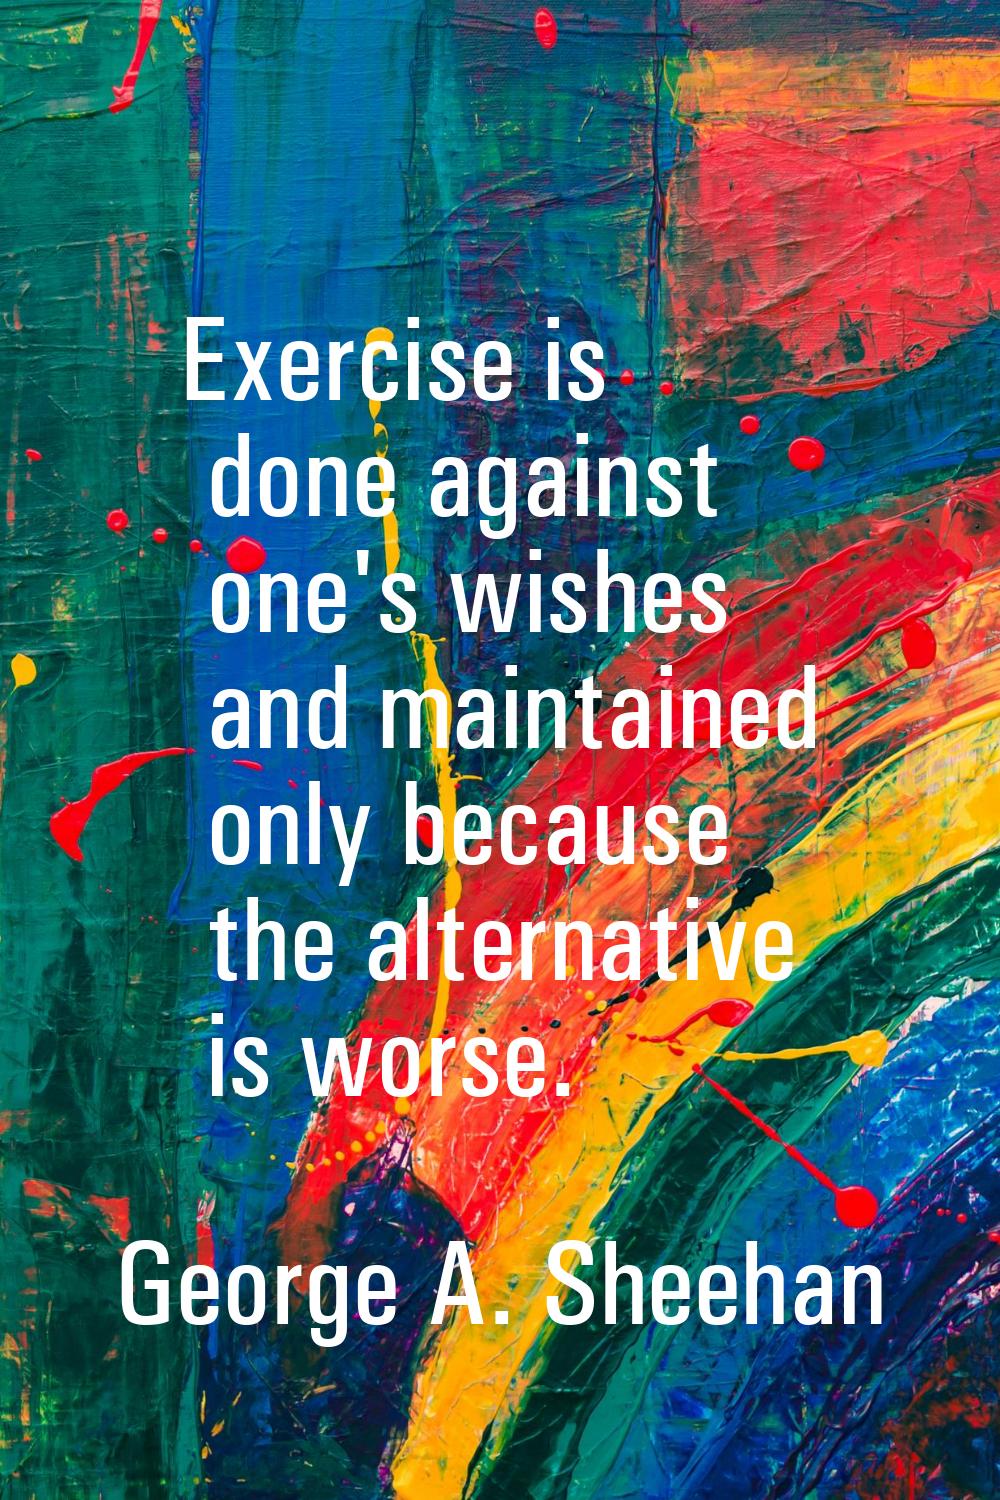 Exercise is done against one's wishes and maintained only because the alternative is worse.